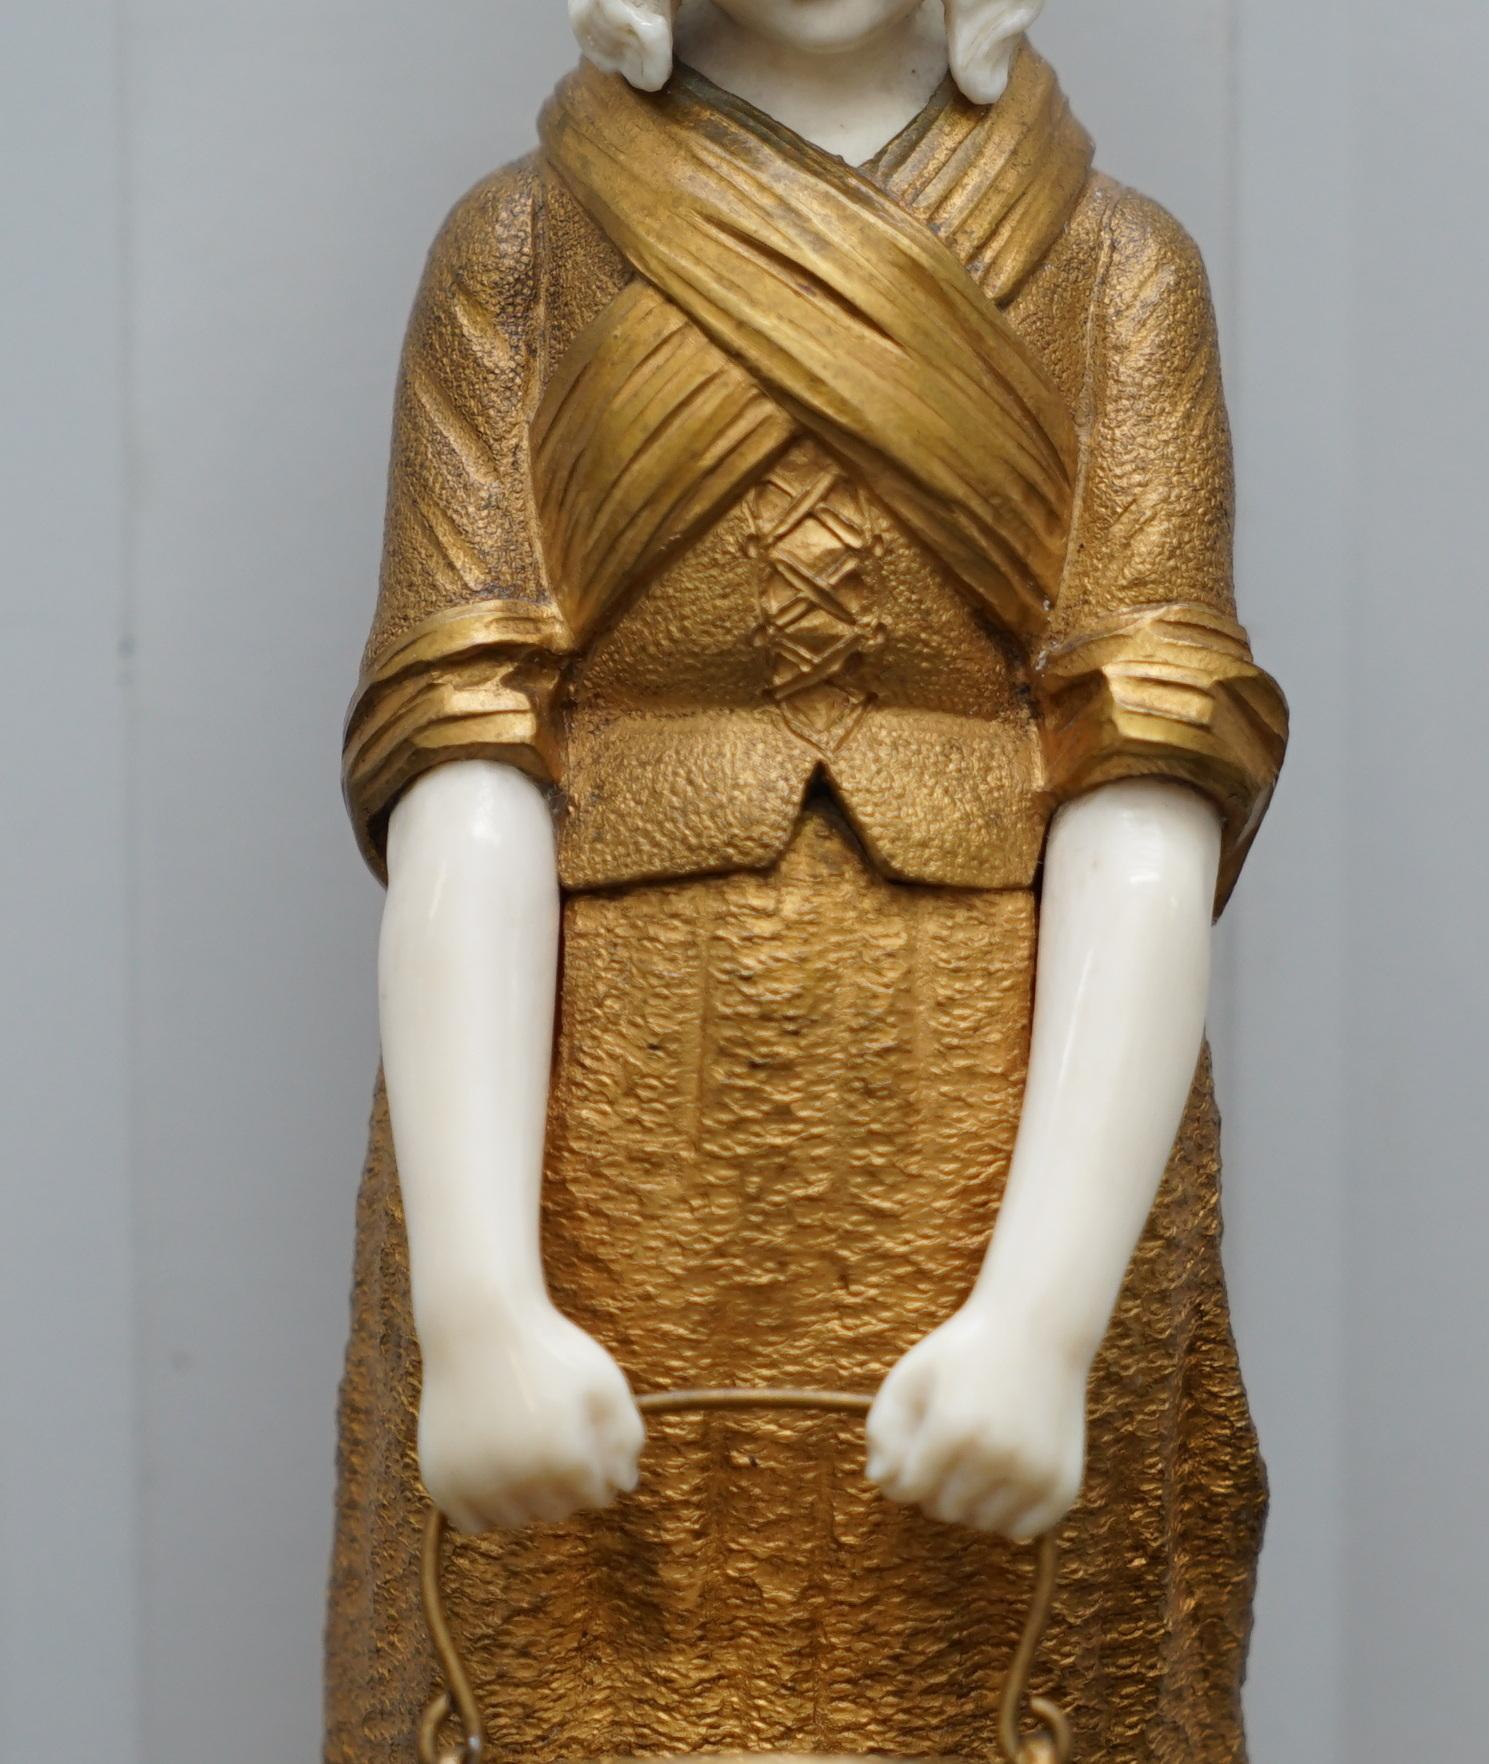 Stunning Collectable 19th Century French Gilt Bronze Dominique Alonzo Statue 3